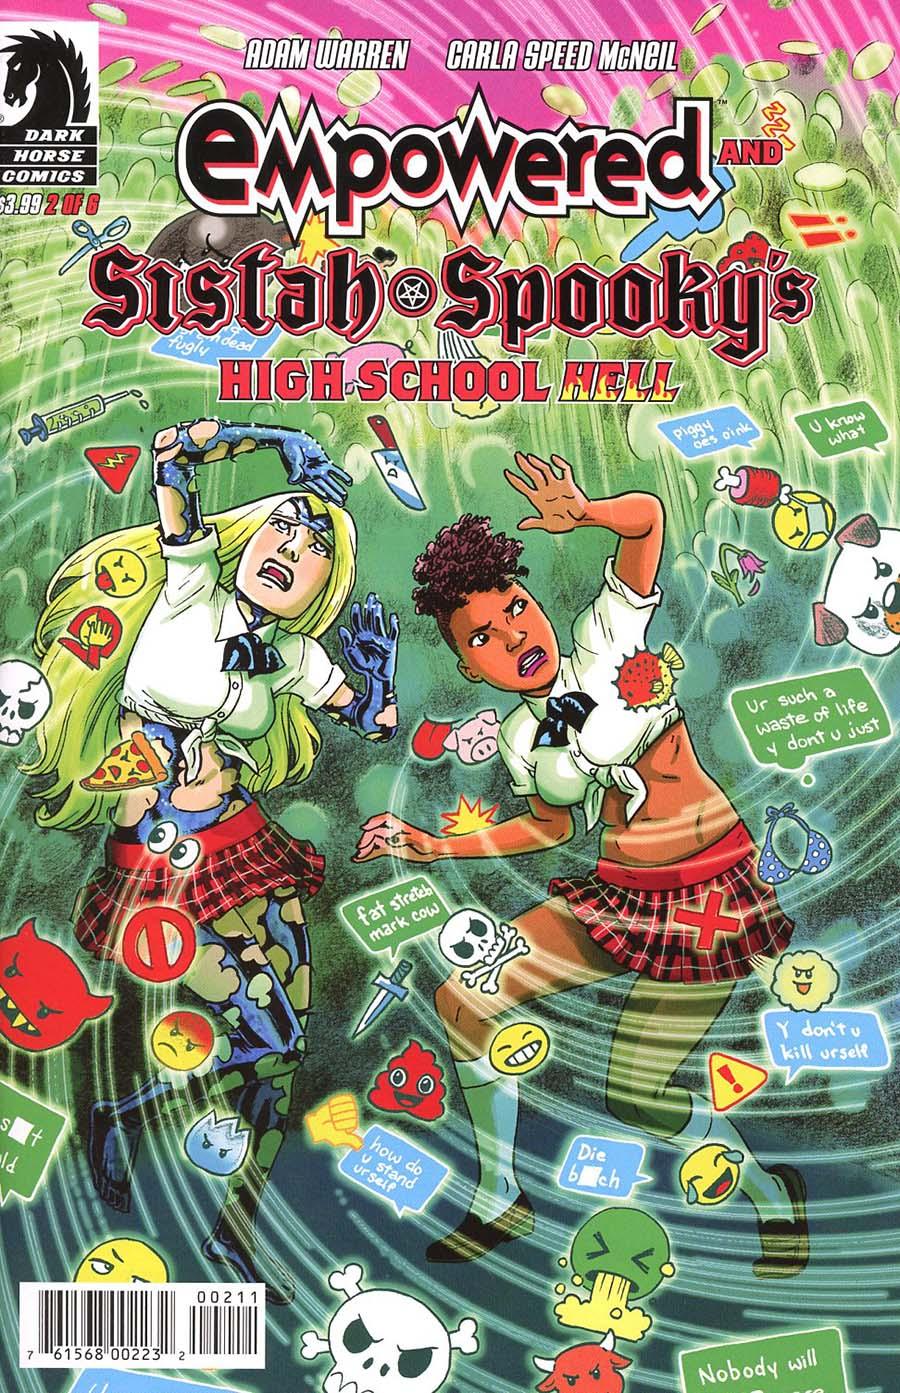 Empowered And Sistah Spookys High School Hell Vol. 1 #2